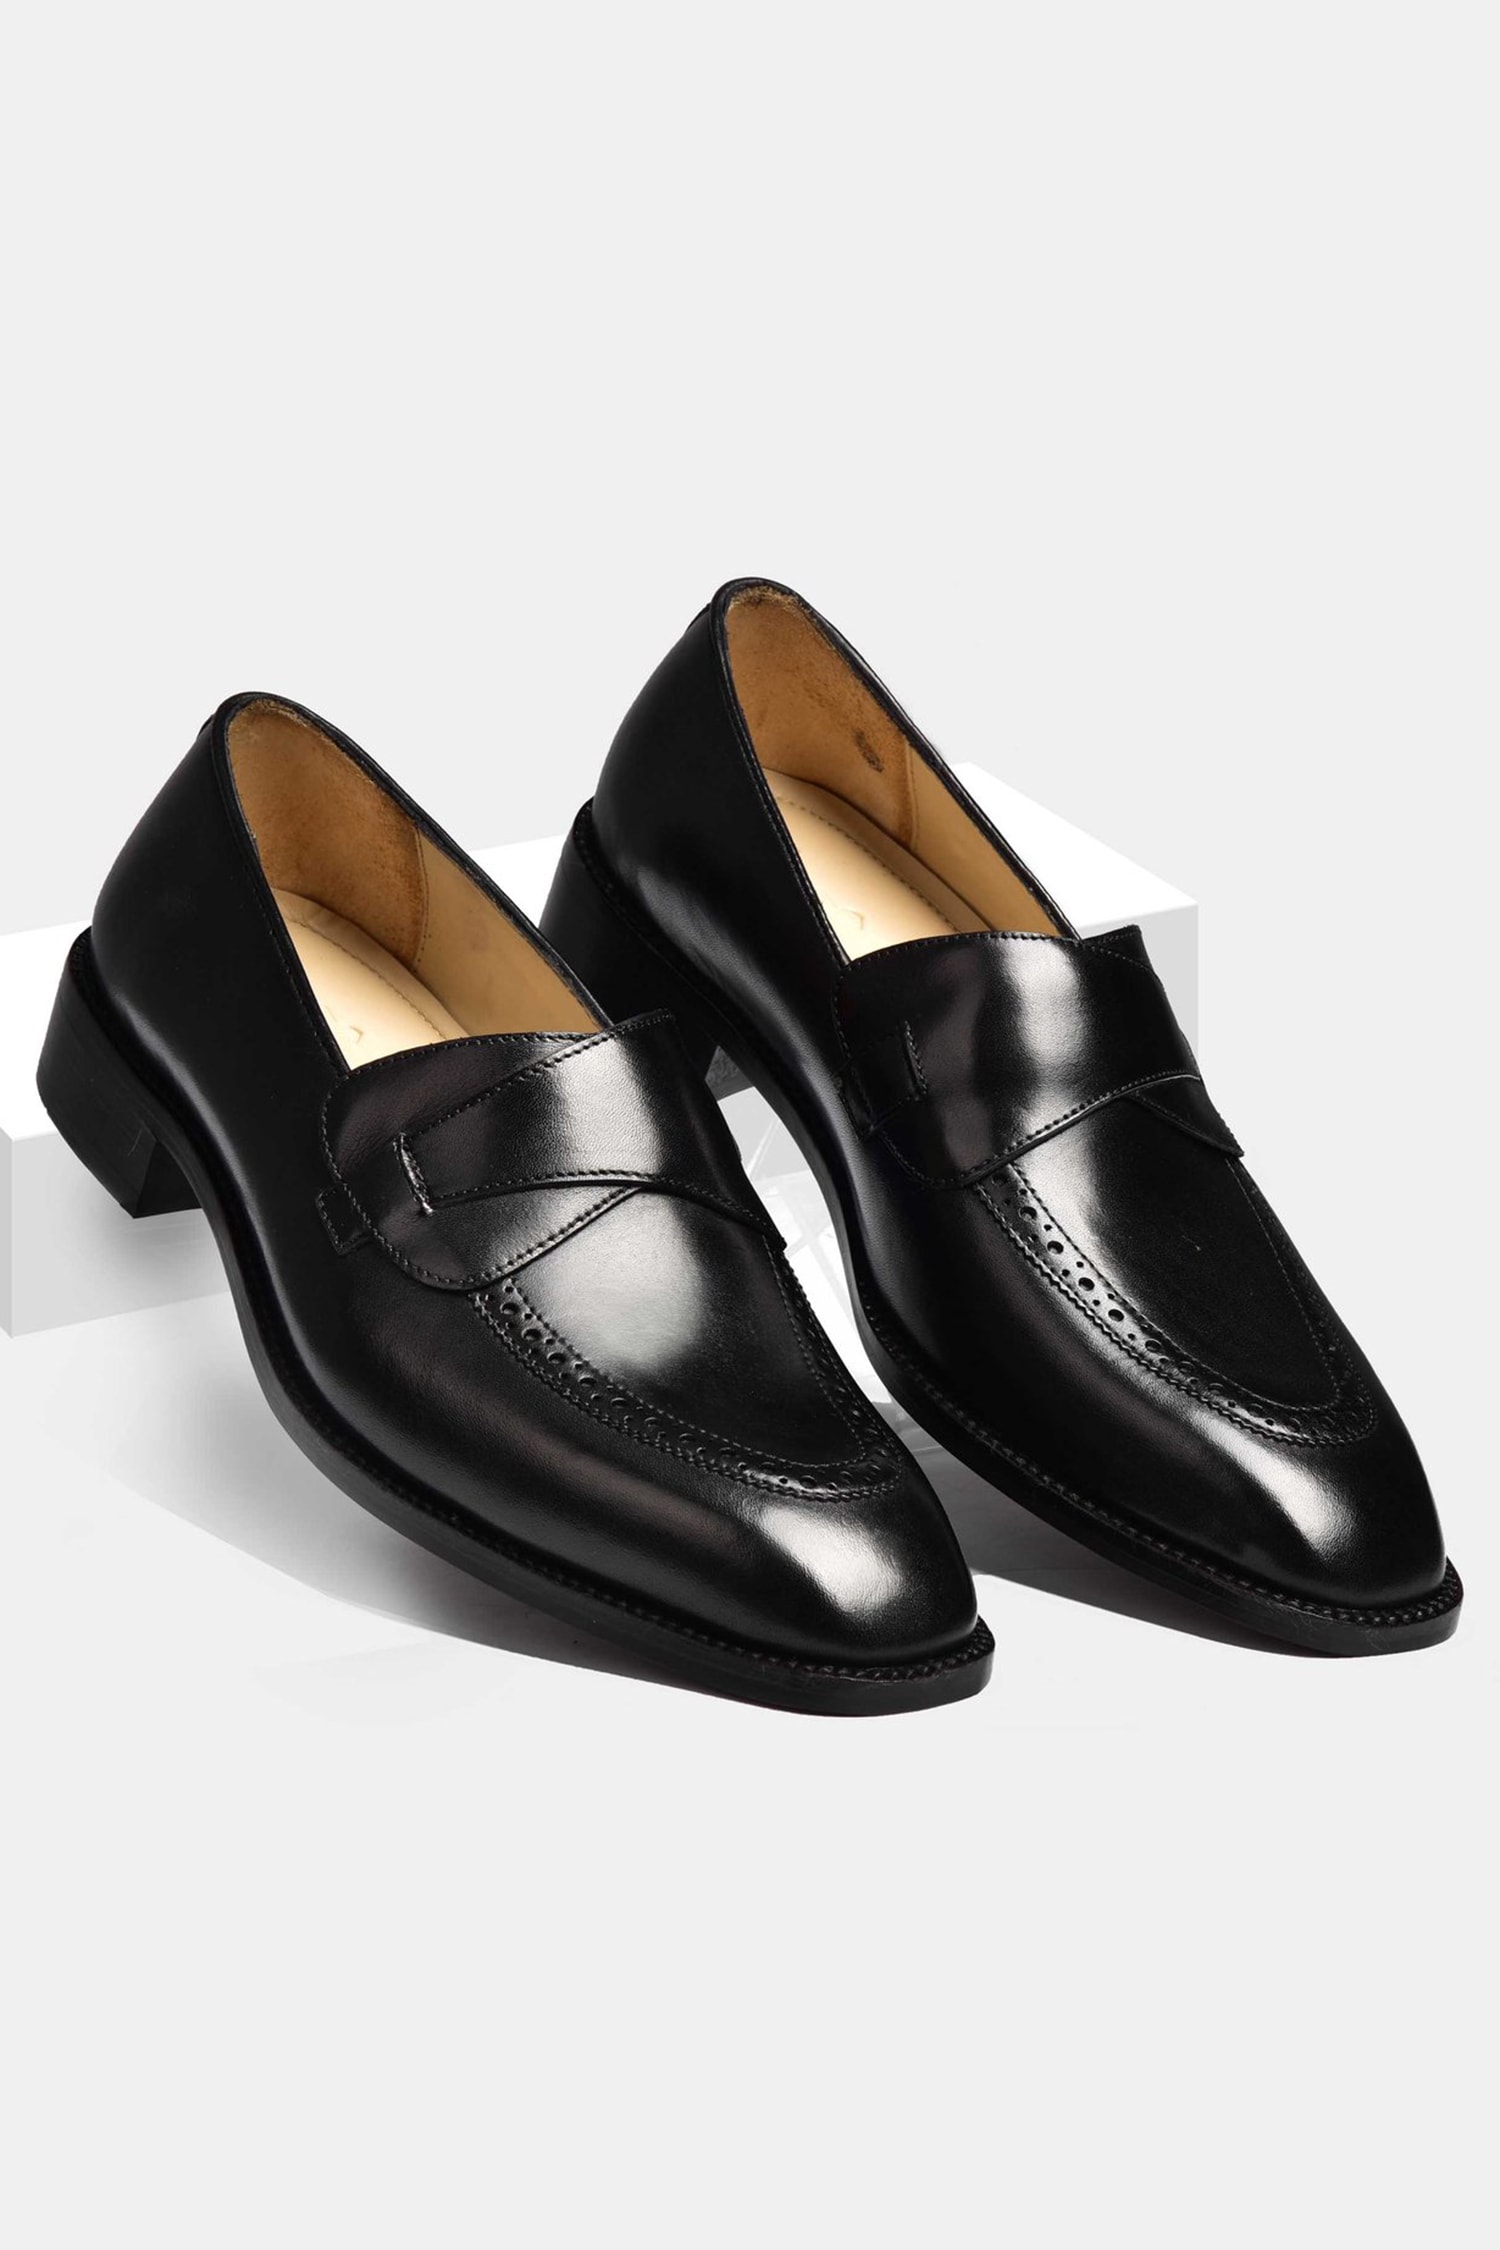 black painted loafers